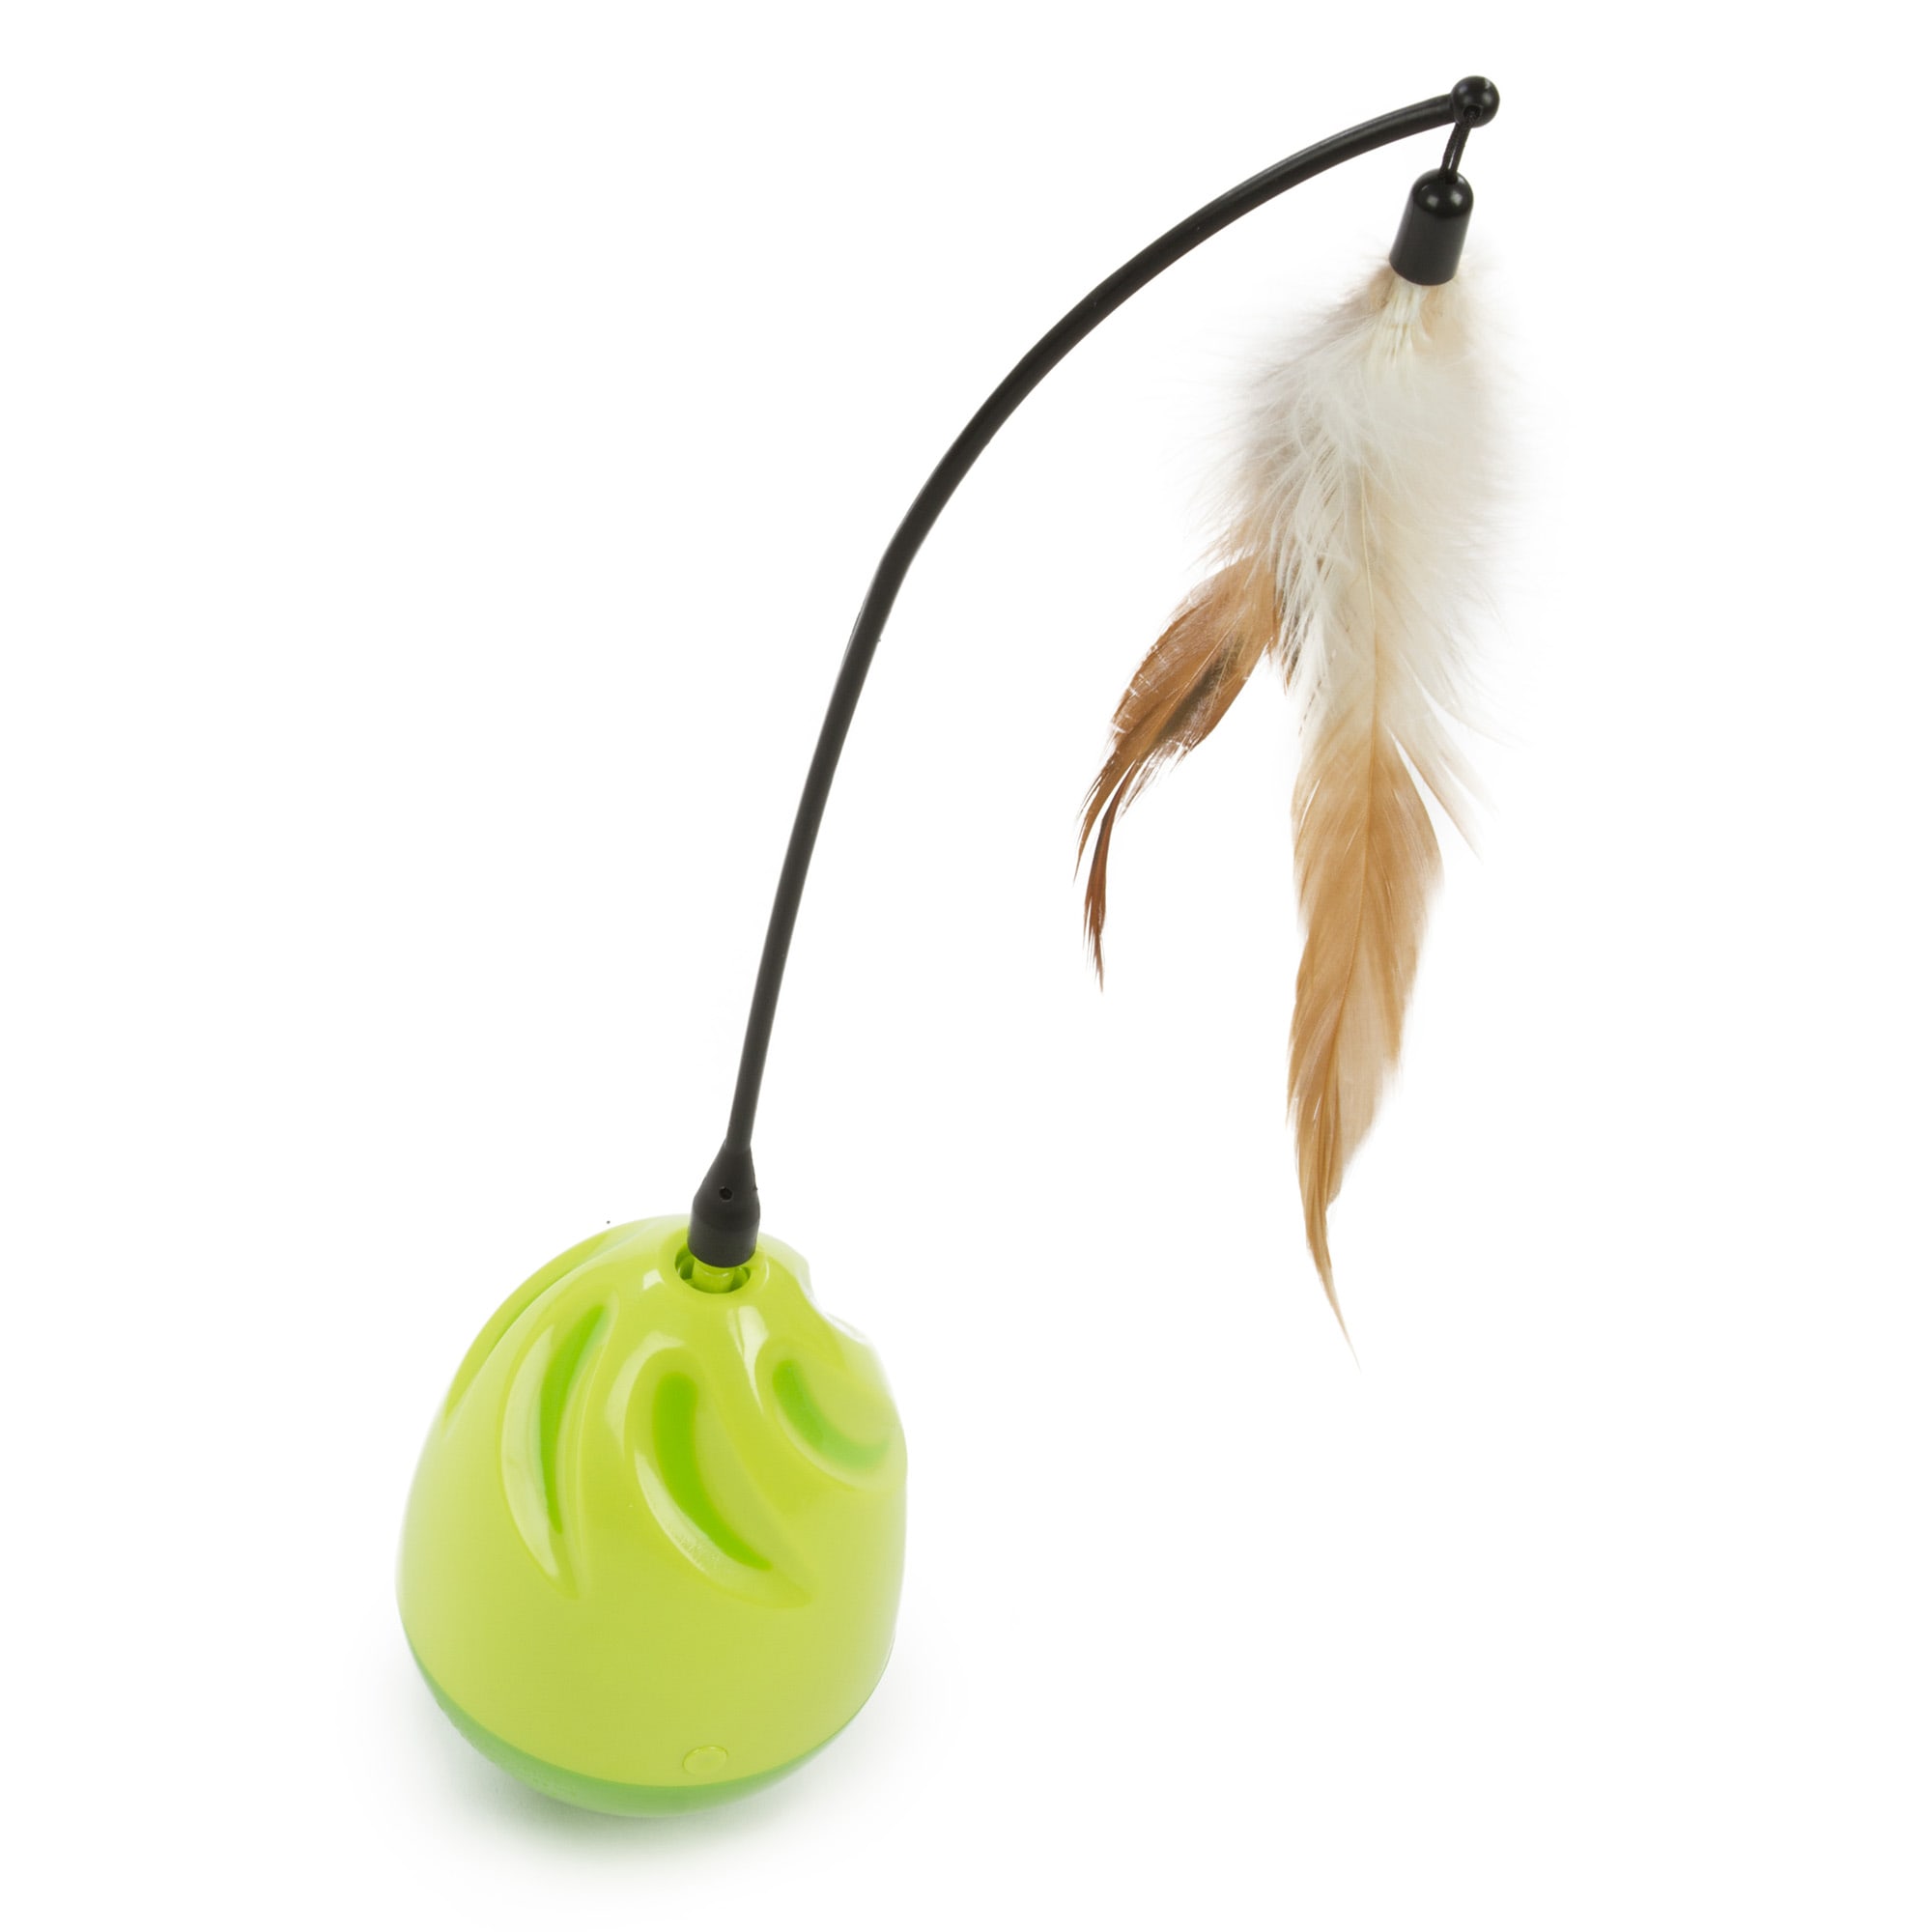 smartykat feather whirl electronic motion cat toy